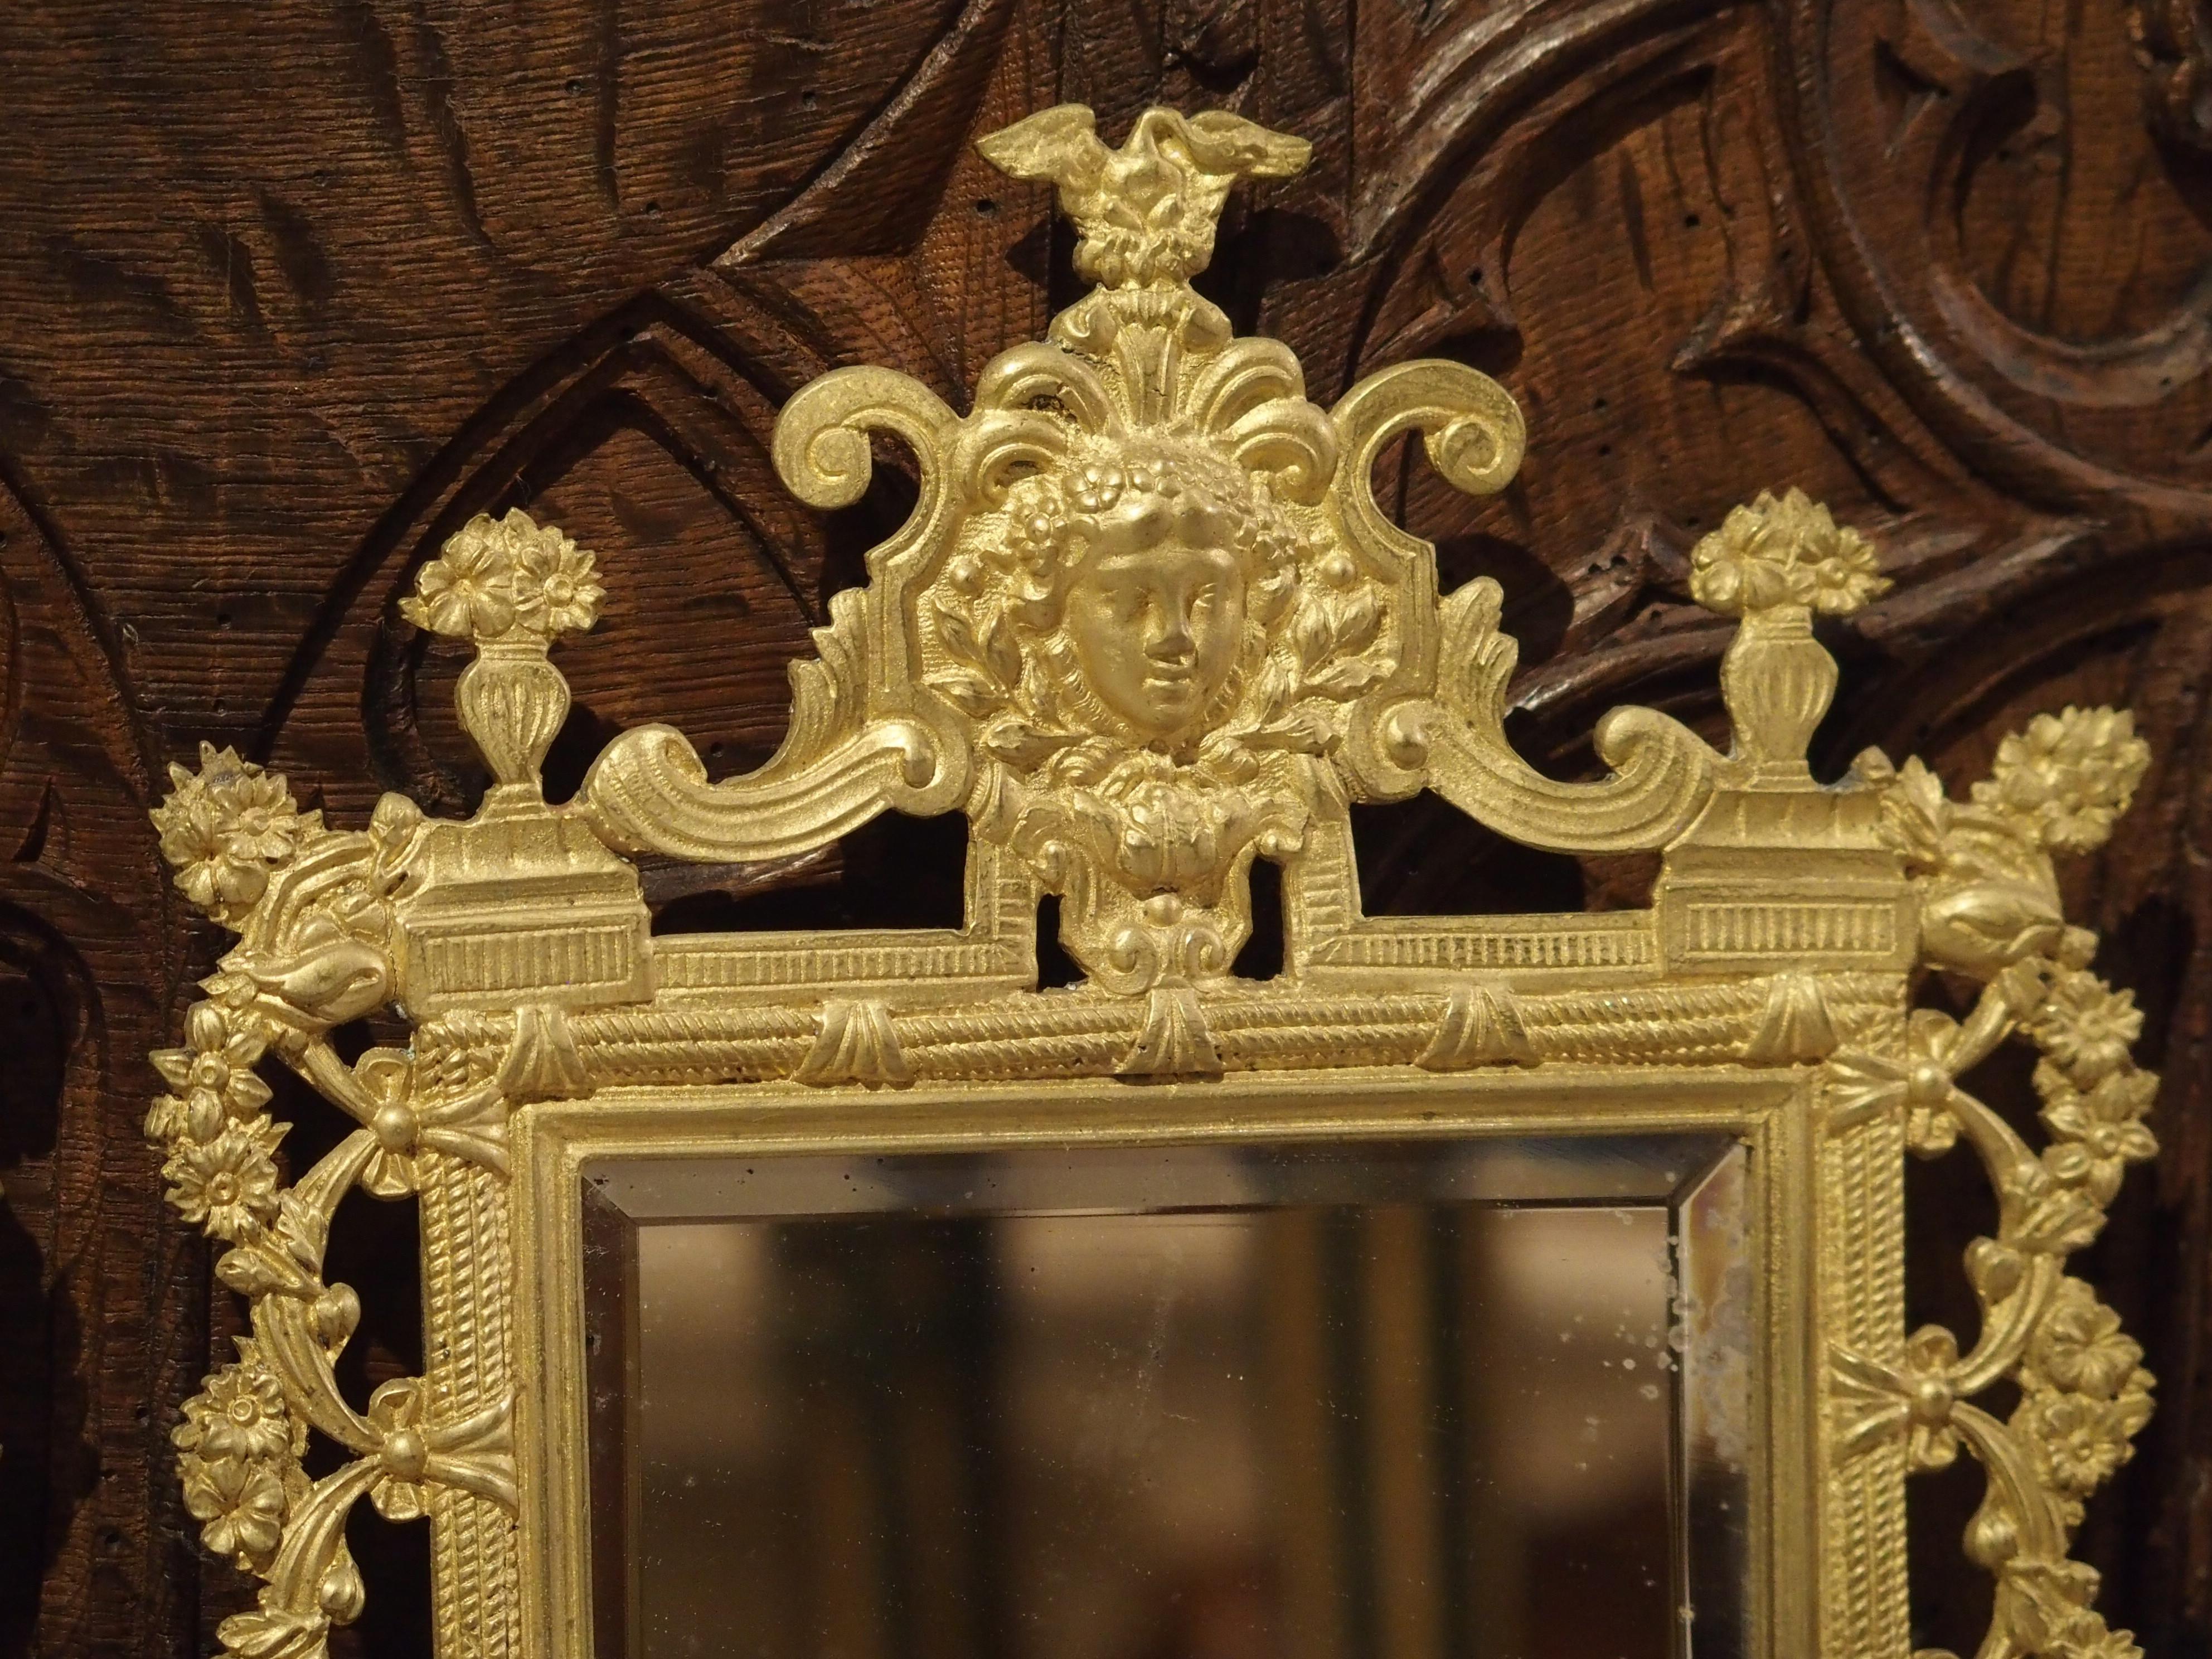 Pair of French Bronze Dore Mirrors with Mascarons and Floral Motifs, circa 1880 For Sale 4